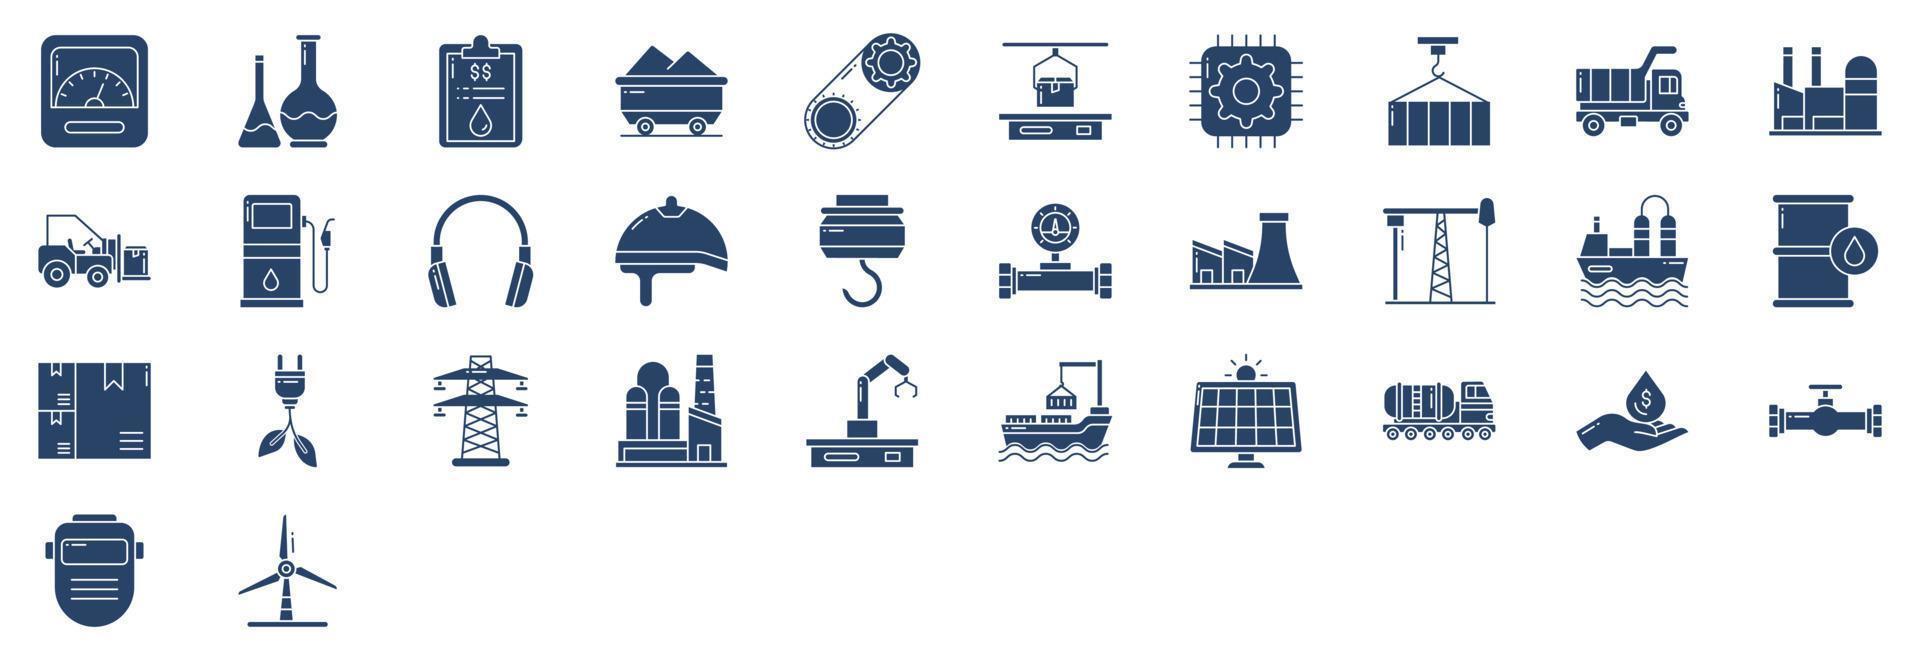 Collection of icons related to Industry and factory, including icons like Dump Truck, Coal,  Oil, Crane and more. vector illustrations, Pixel Perfect set